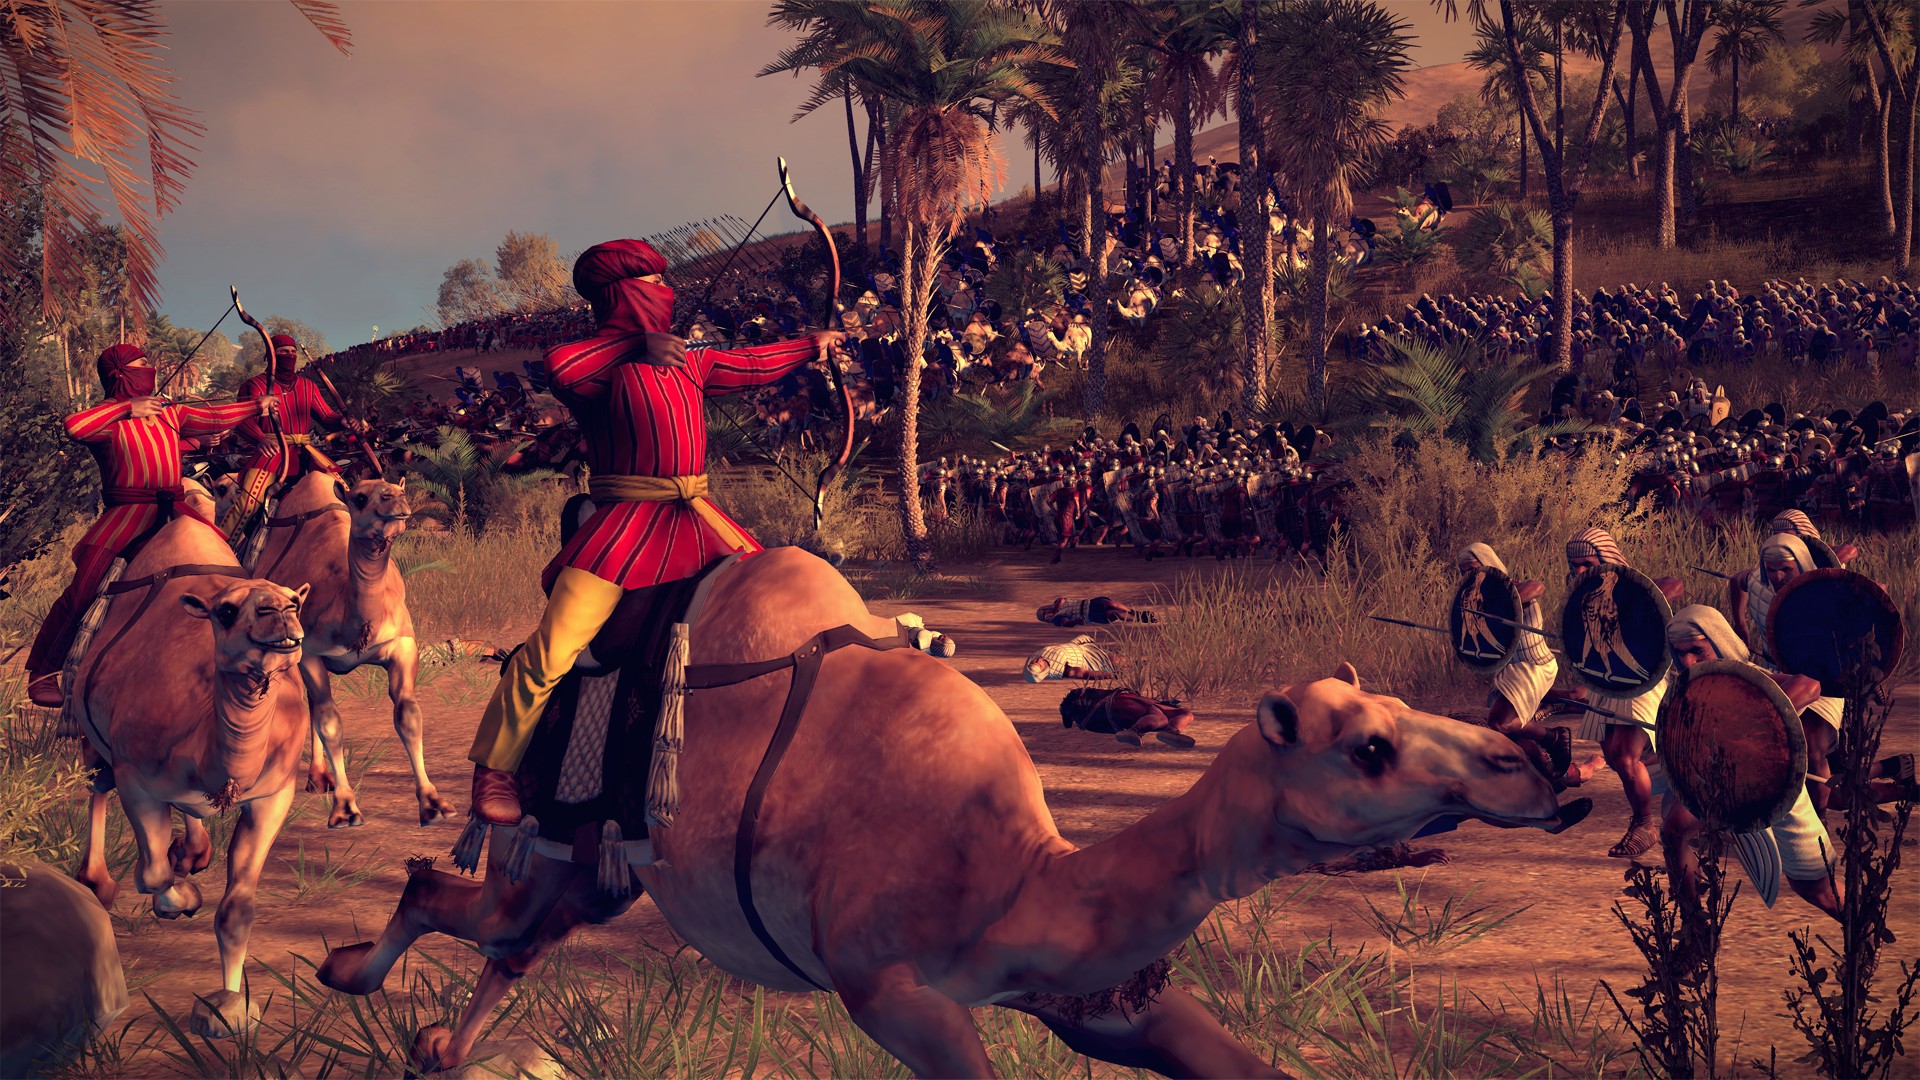 Creative Assembly Gives Away New Total War Rome Ii Dlc For A Week Pc Gamer